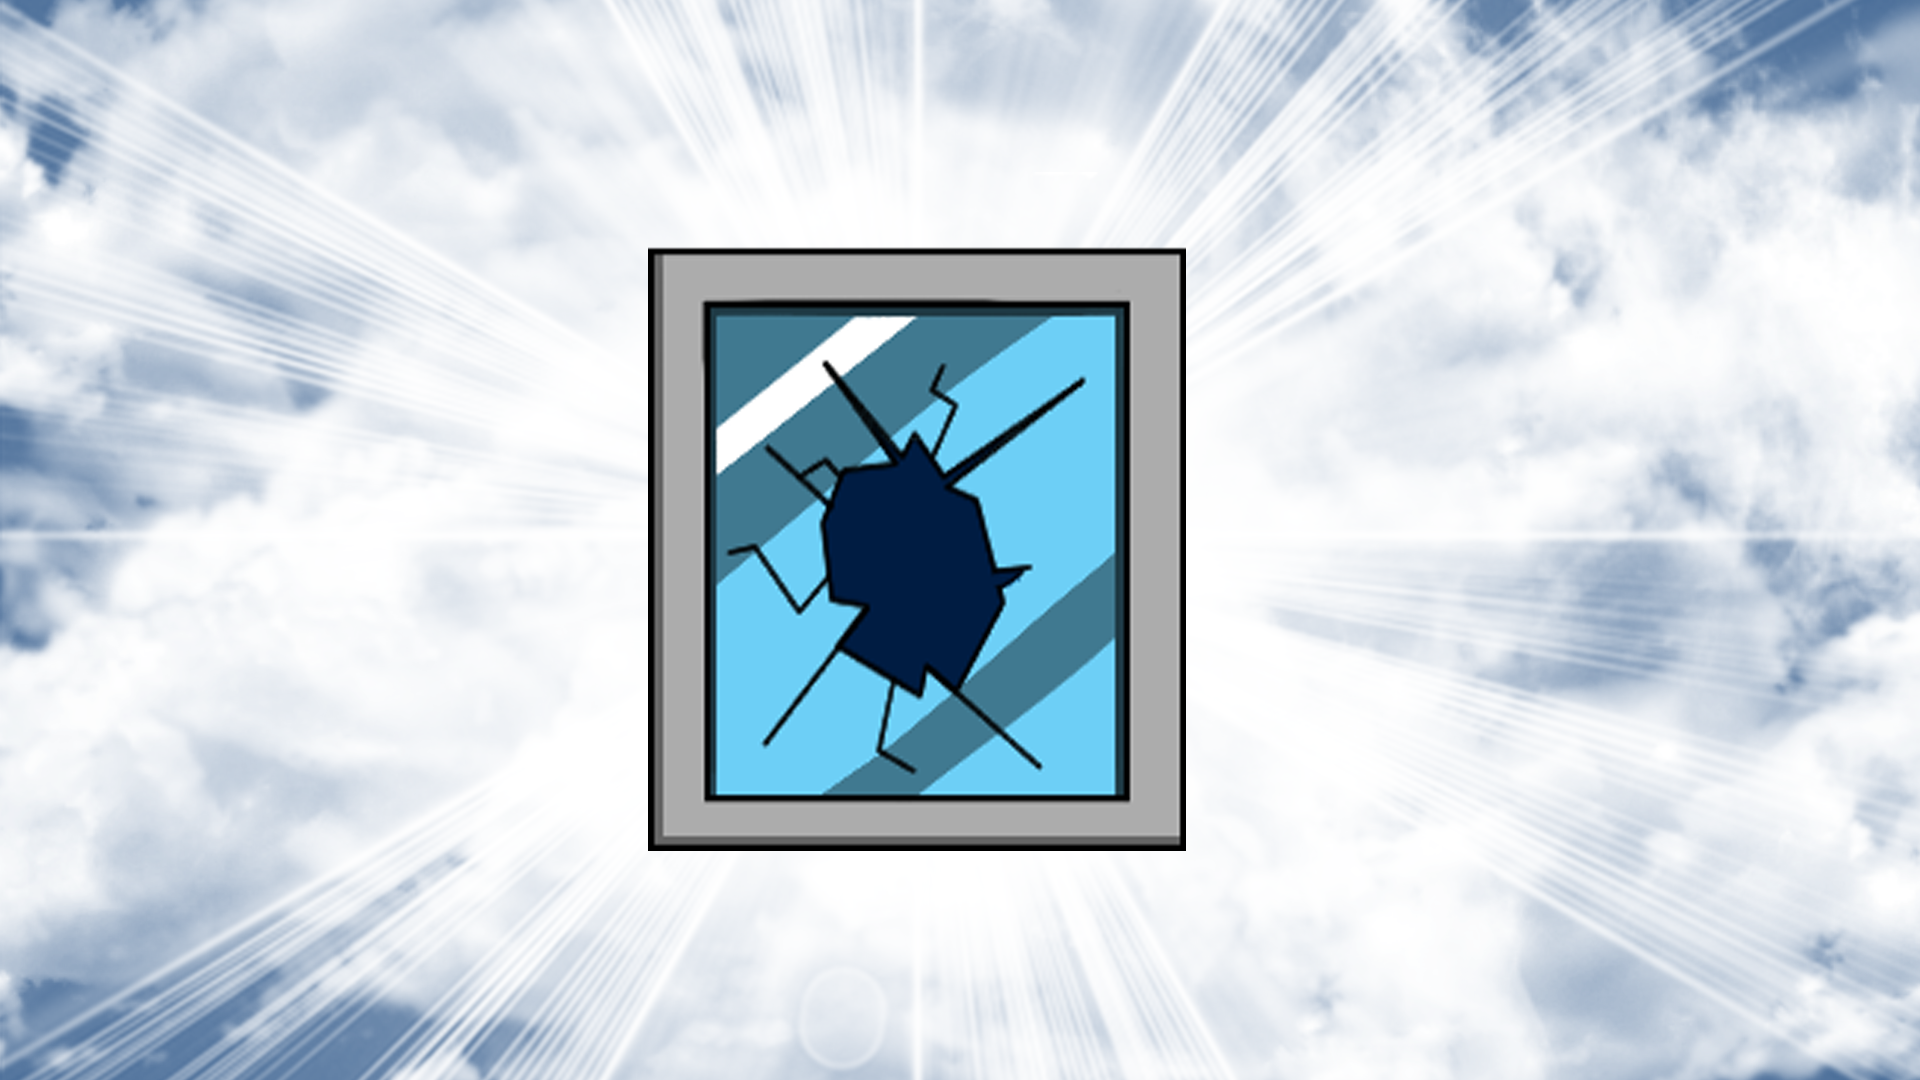 Icon for Defenestration